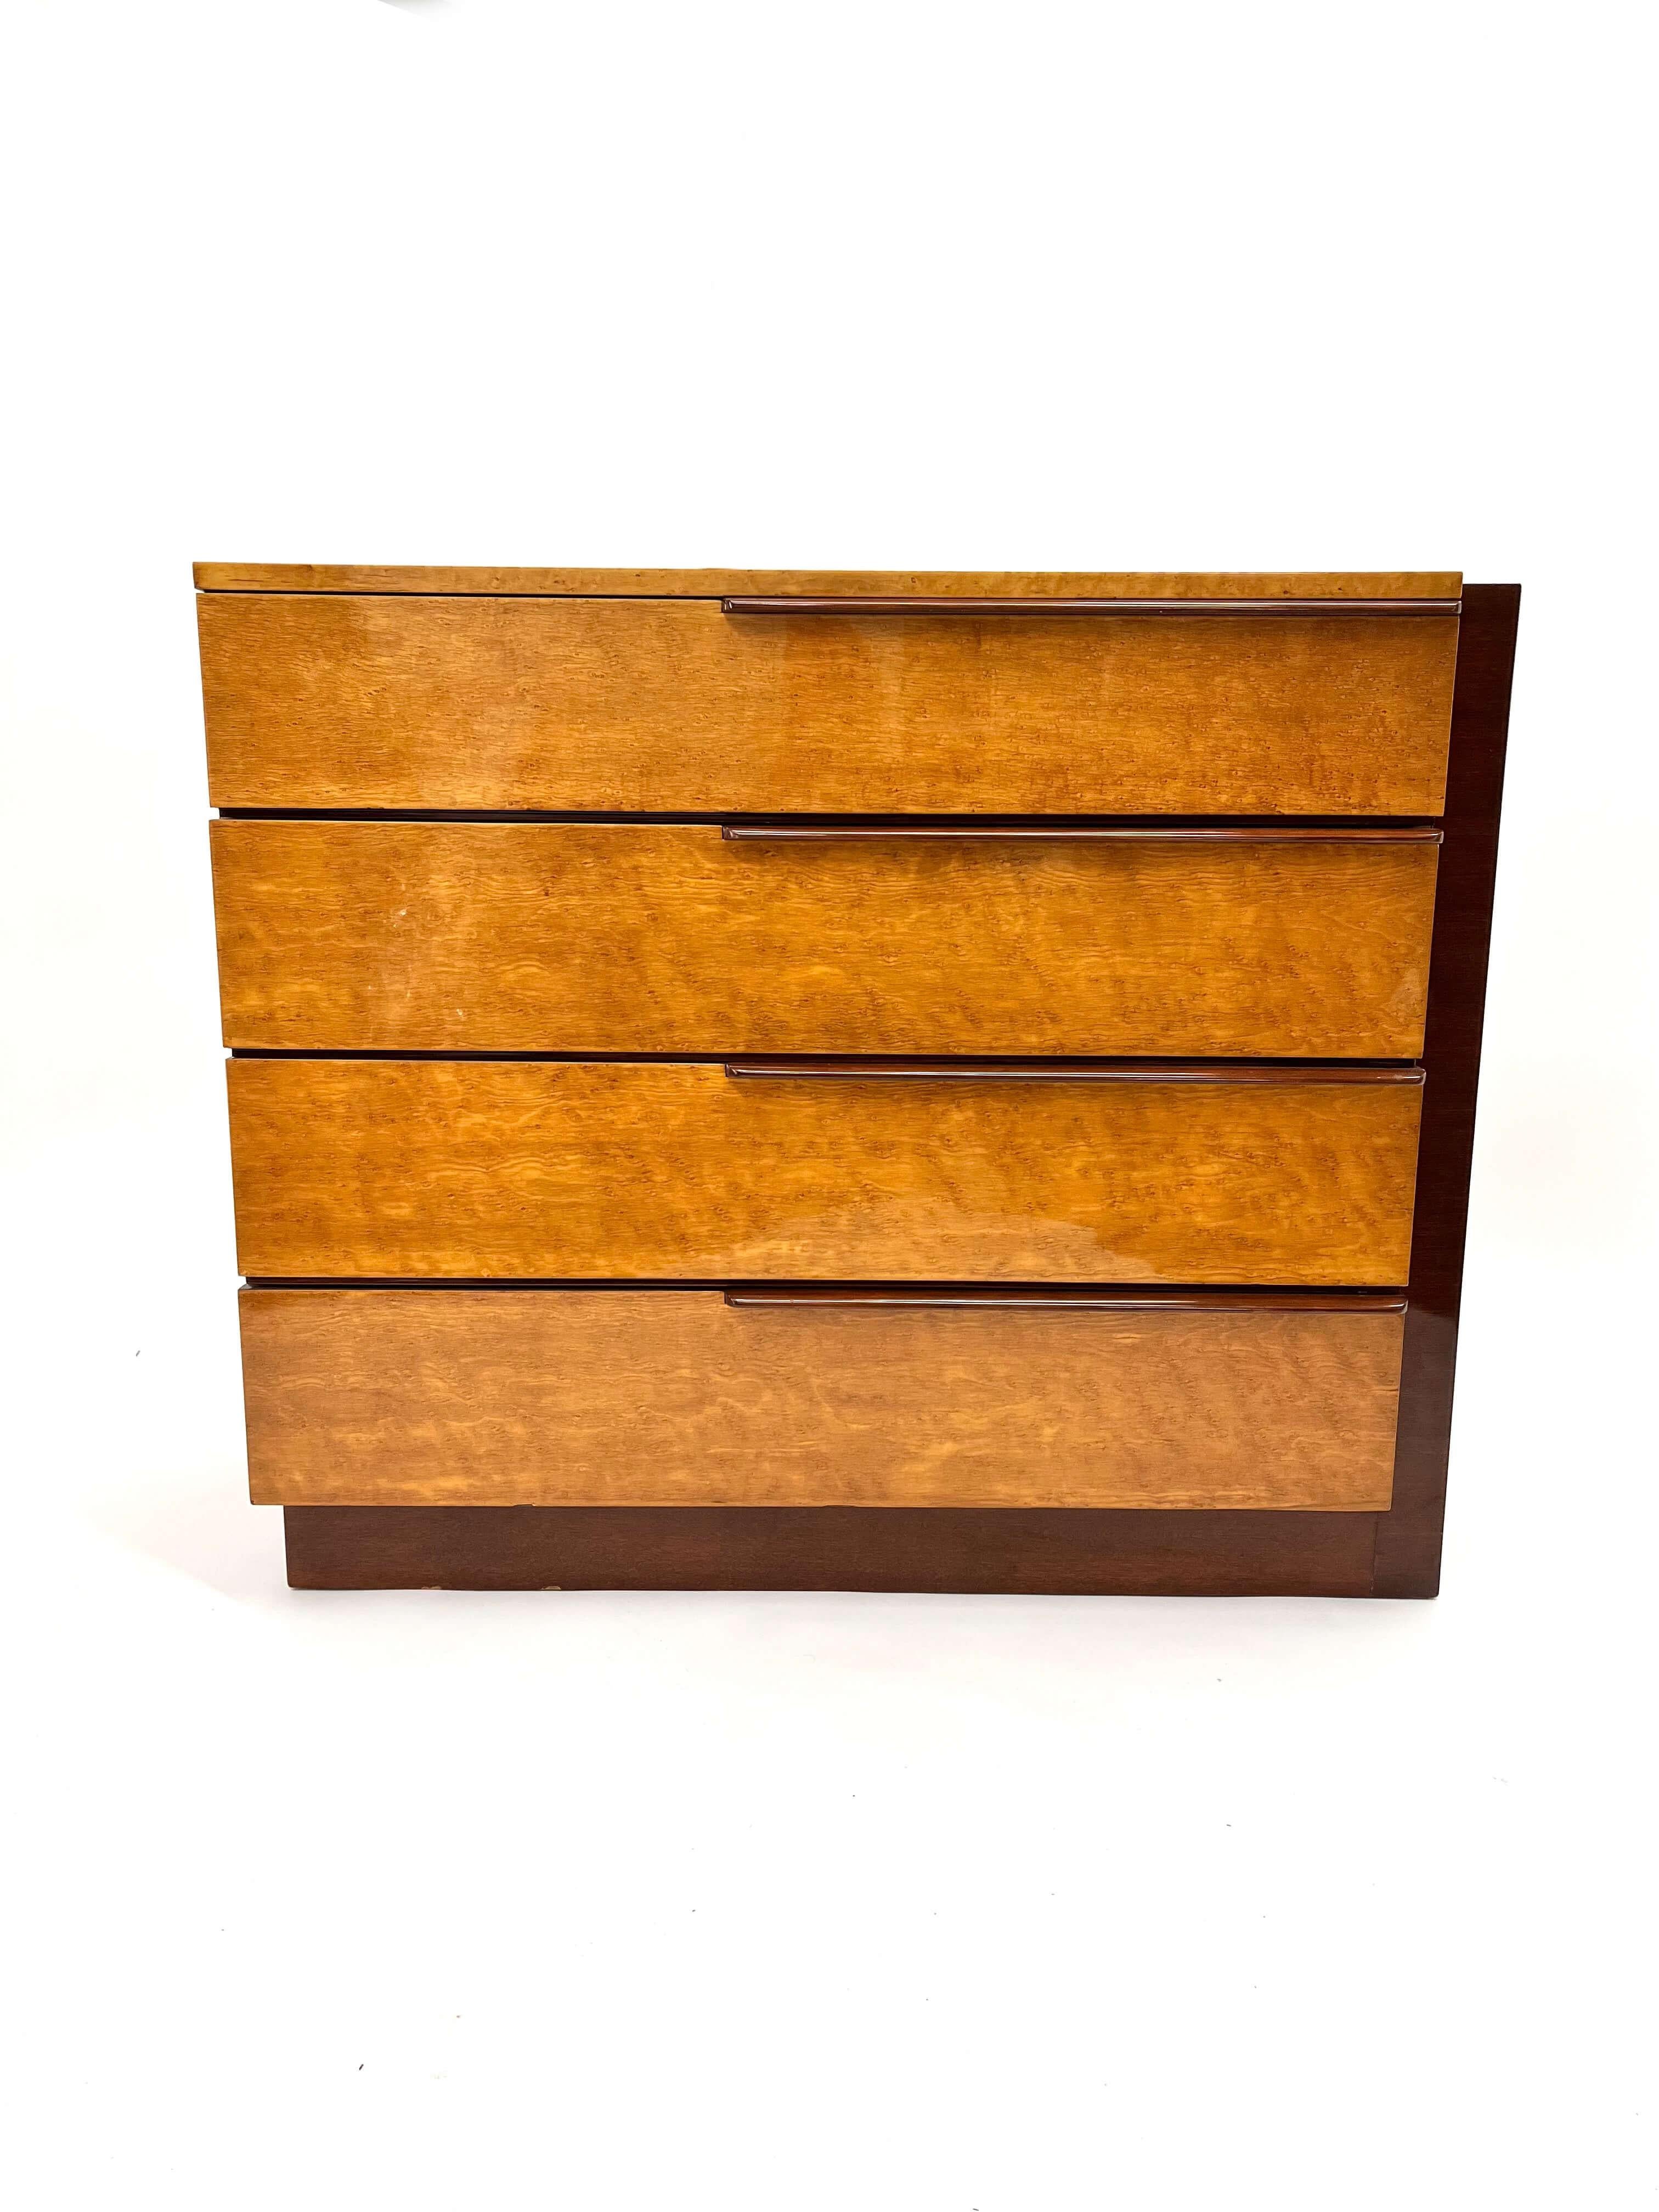 Gilbert Rhode designed this gorgeous and highly glossed dresser is executed in birdseye maple and maghogany. It has the perfect balance of mid century modern simplicity and the fine craftsmanship and rich materials characteristic of the Art Deco